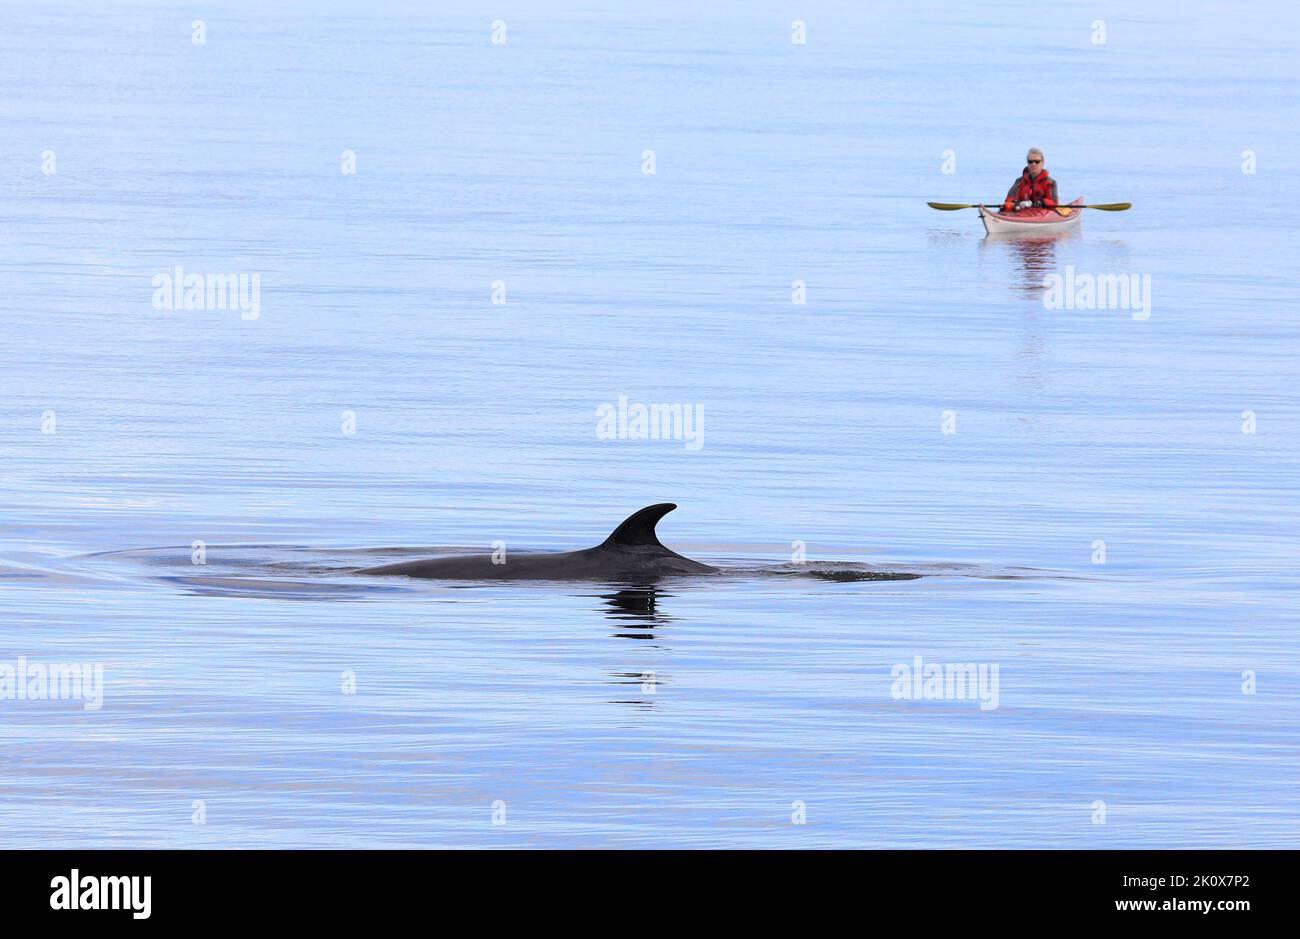 Tourist in Kayak observing whale in Tadoussac area Saint Lawrence river estuary, Côte-Nord, Canada Stock Photo